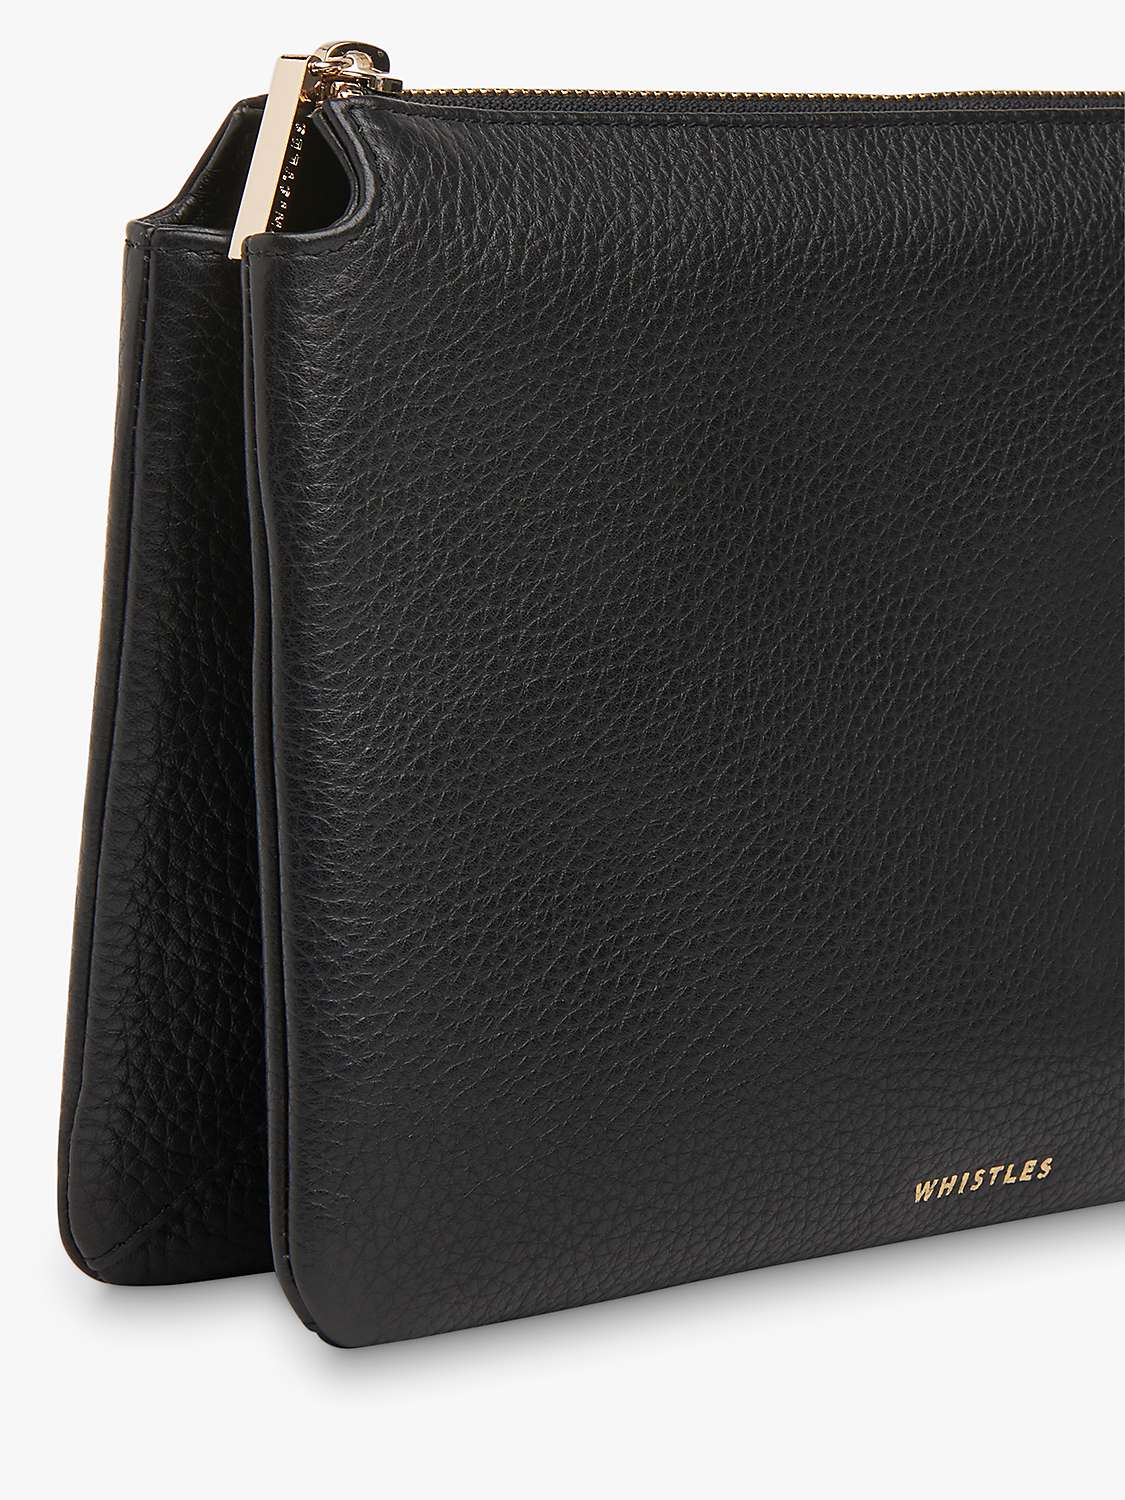 Buy Whistles Elita Leather Double Pouch, Black Online at johnlewis.com